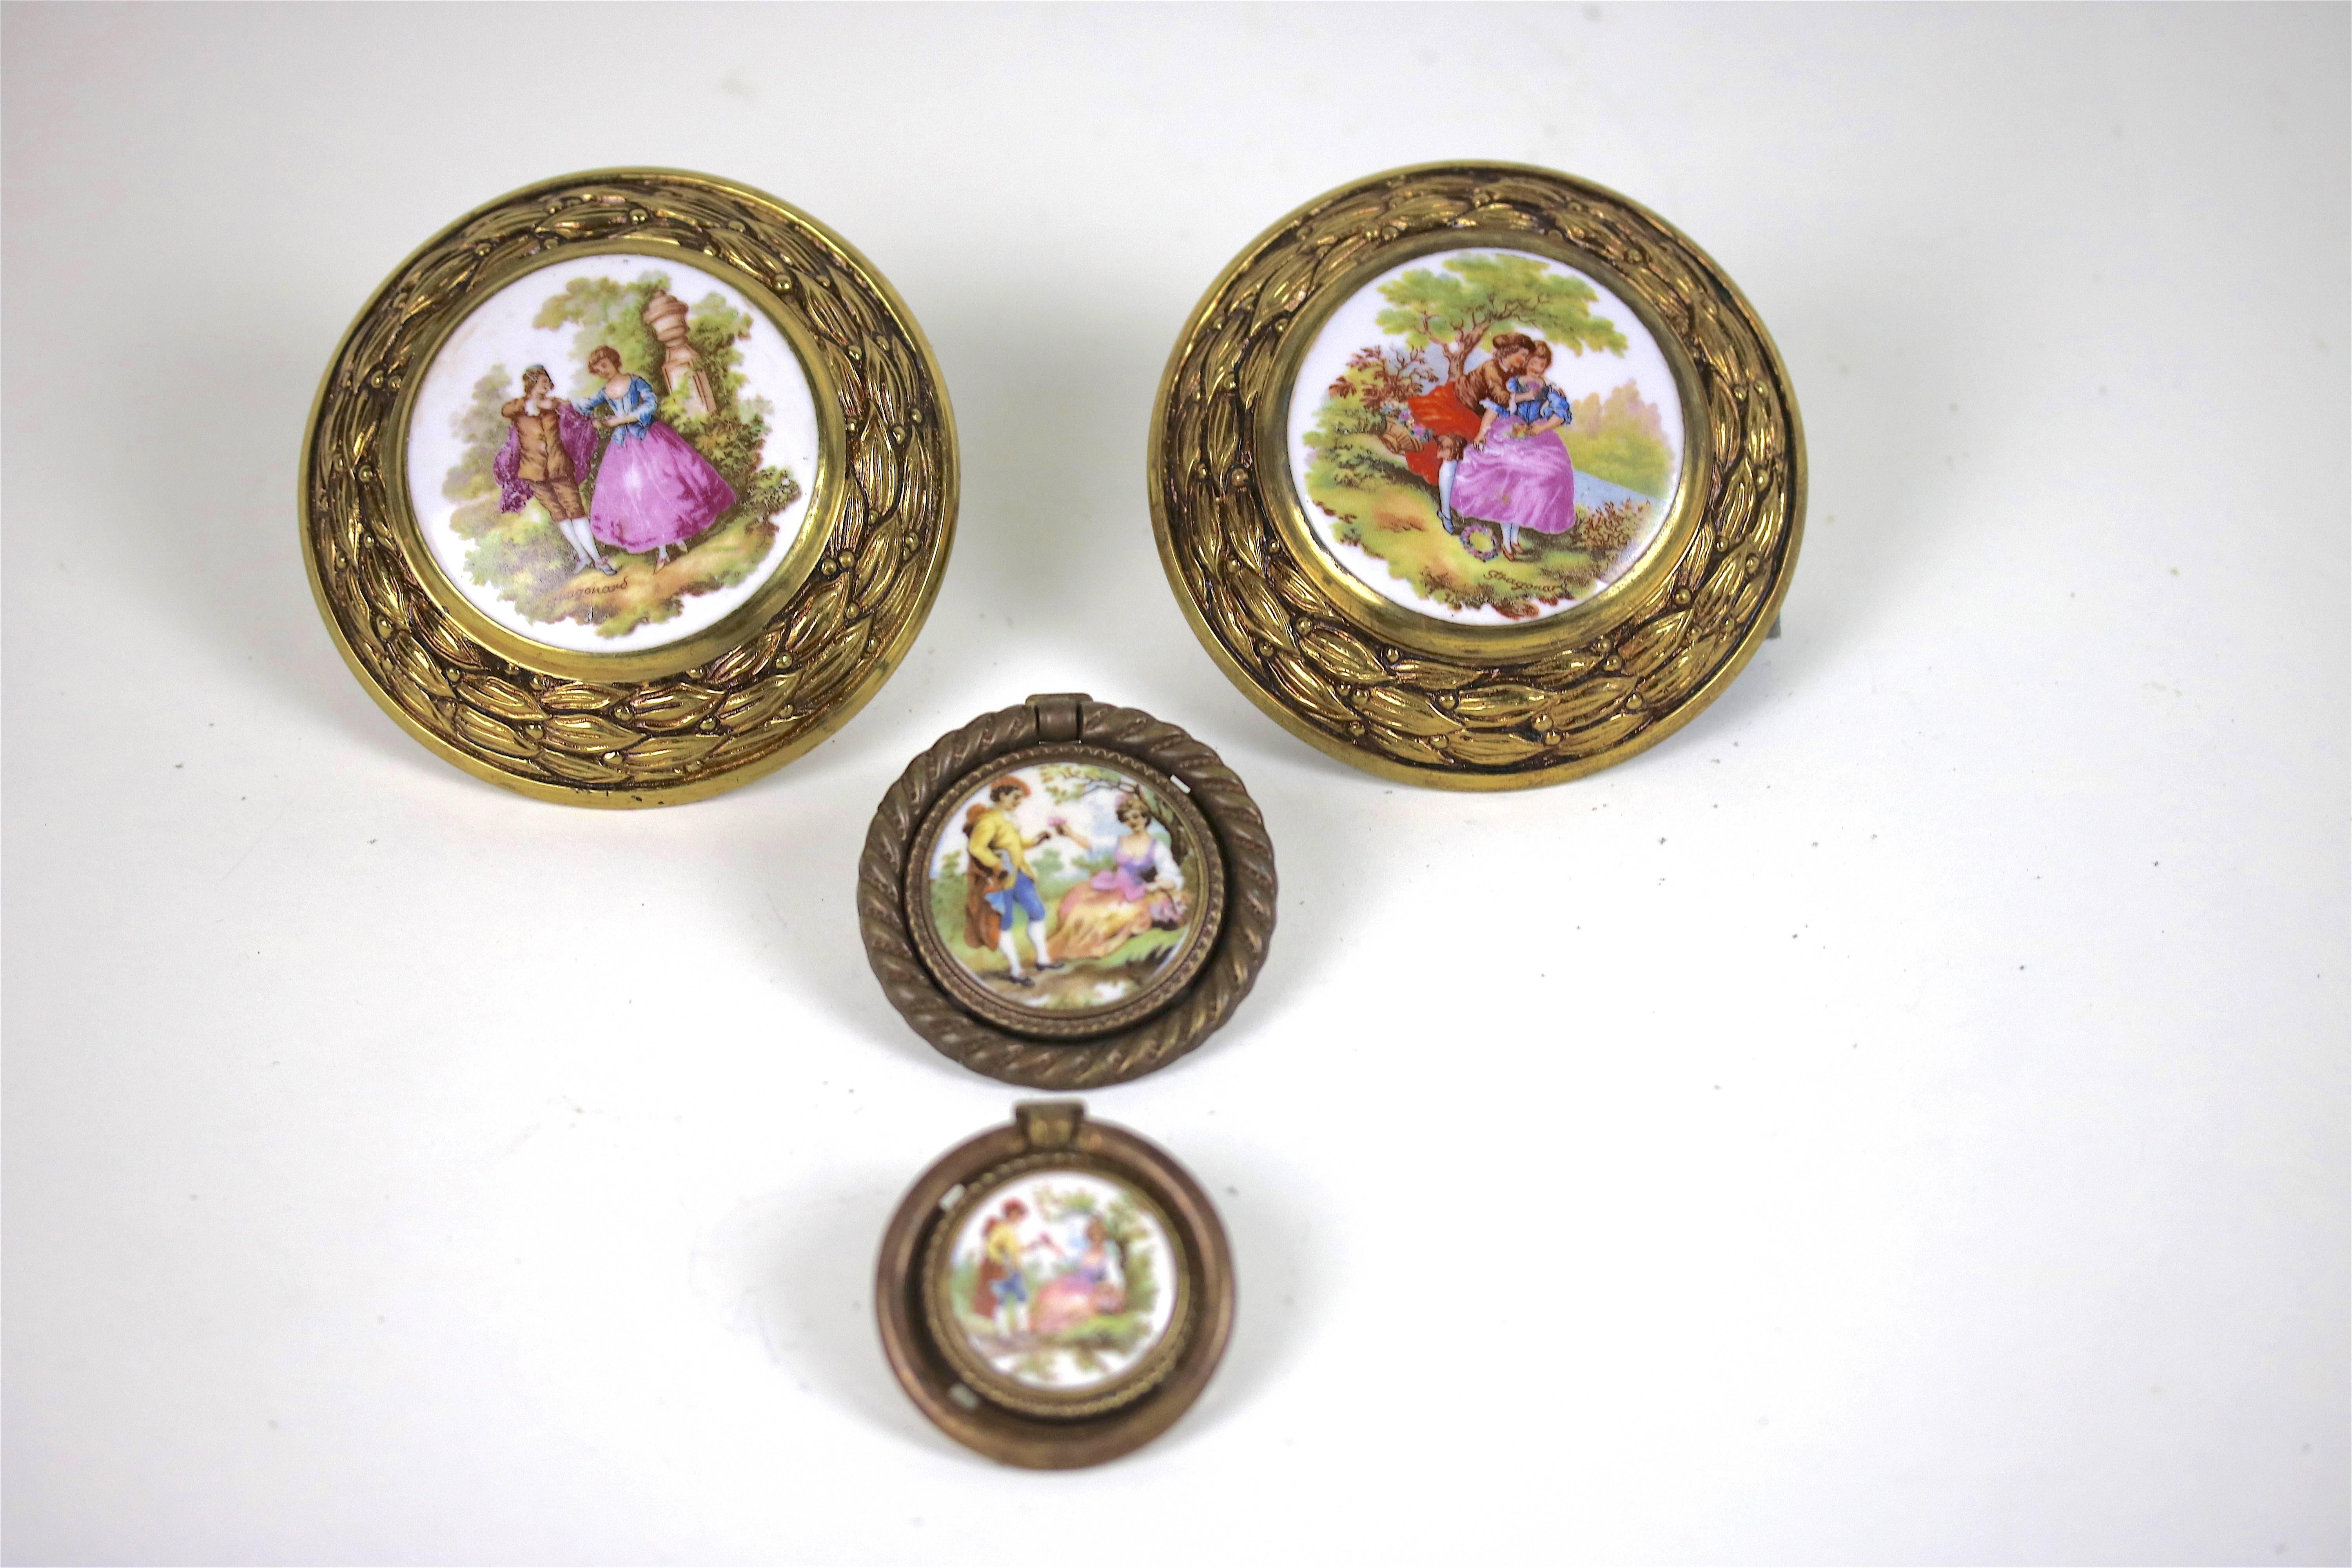 A beautiful large pair of French Fragonard signed porcelains in a highly decorative brass frame can be used for a door pull or drawer pull or drapery tie back-there is also a pair of smaller antique coordinating drawer ring pulls with Fragonard